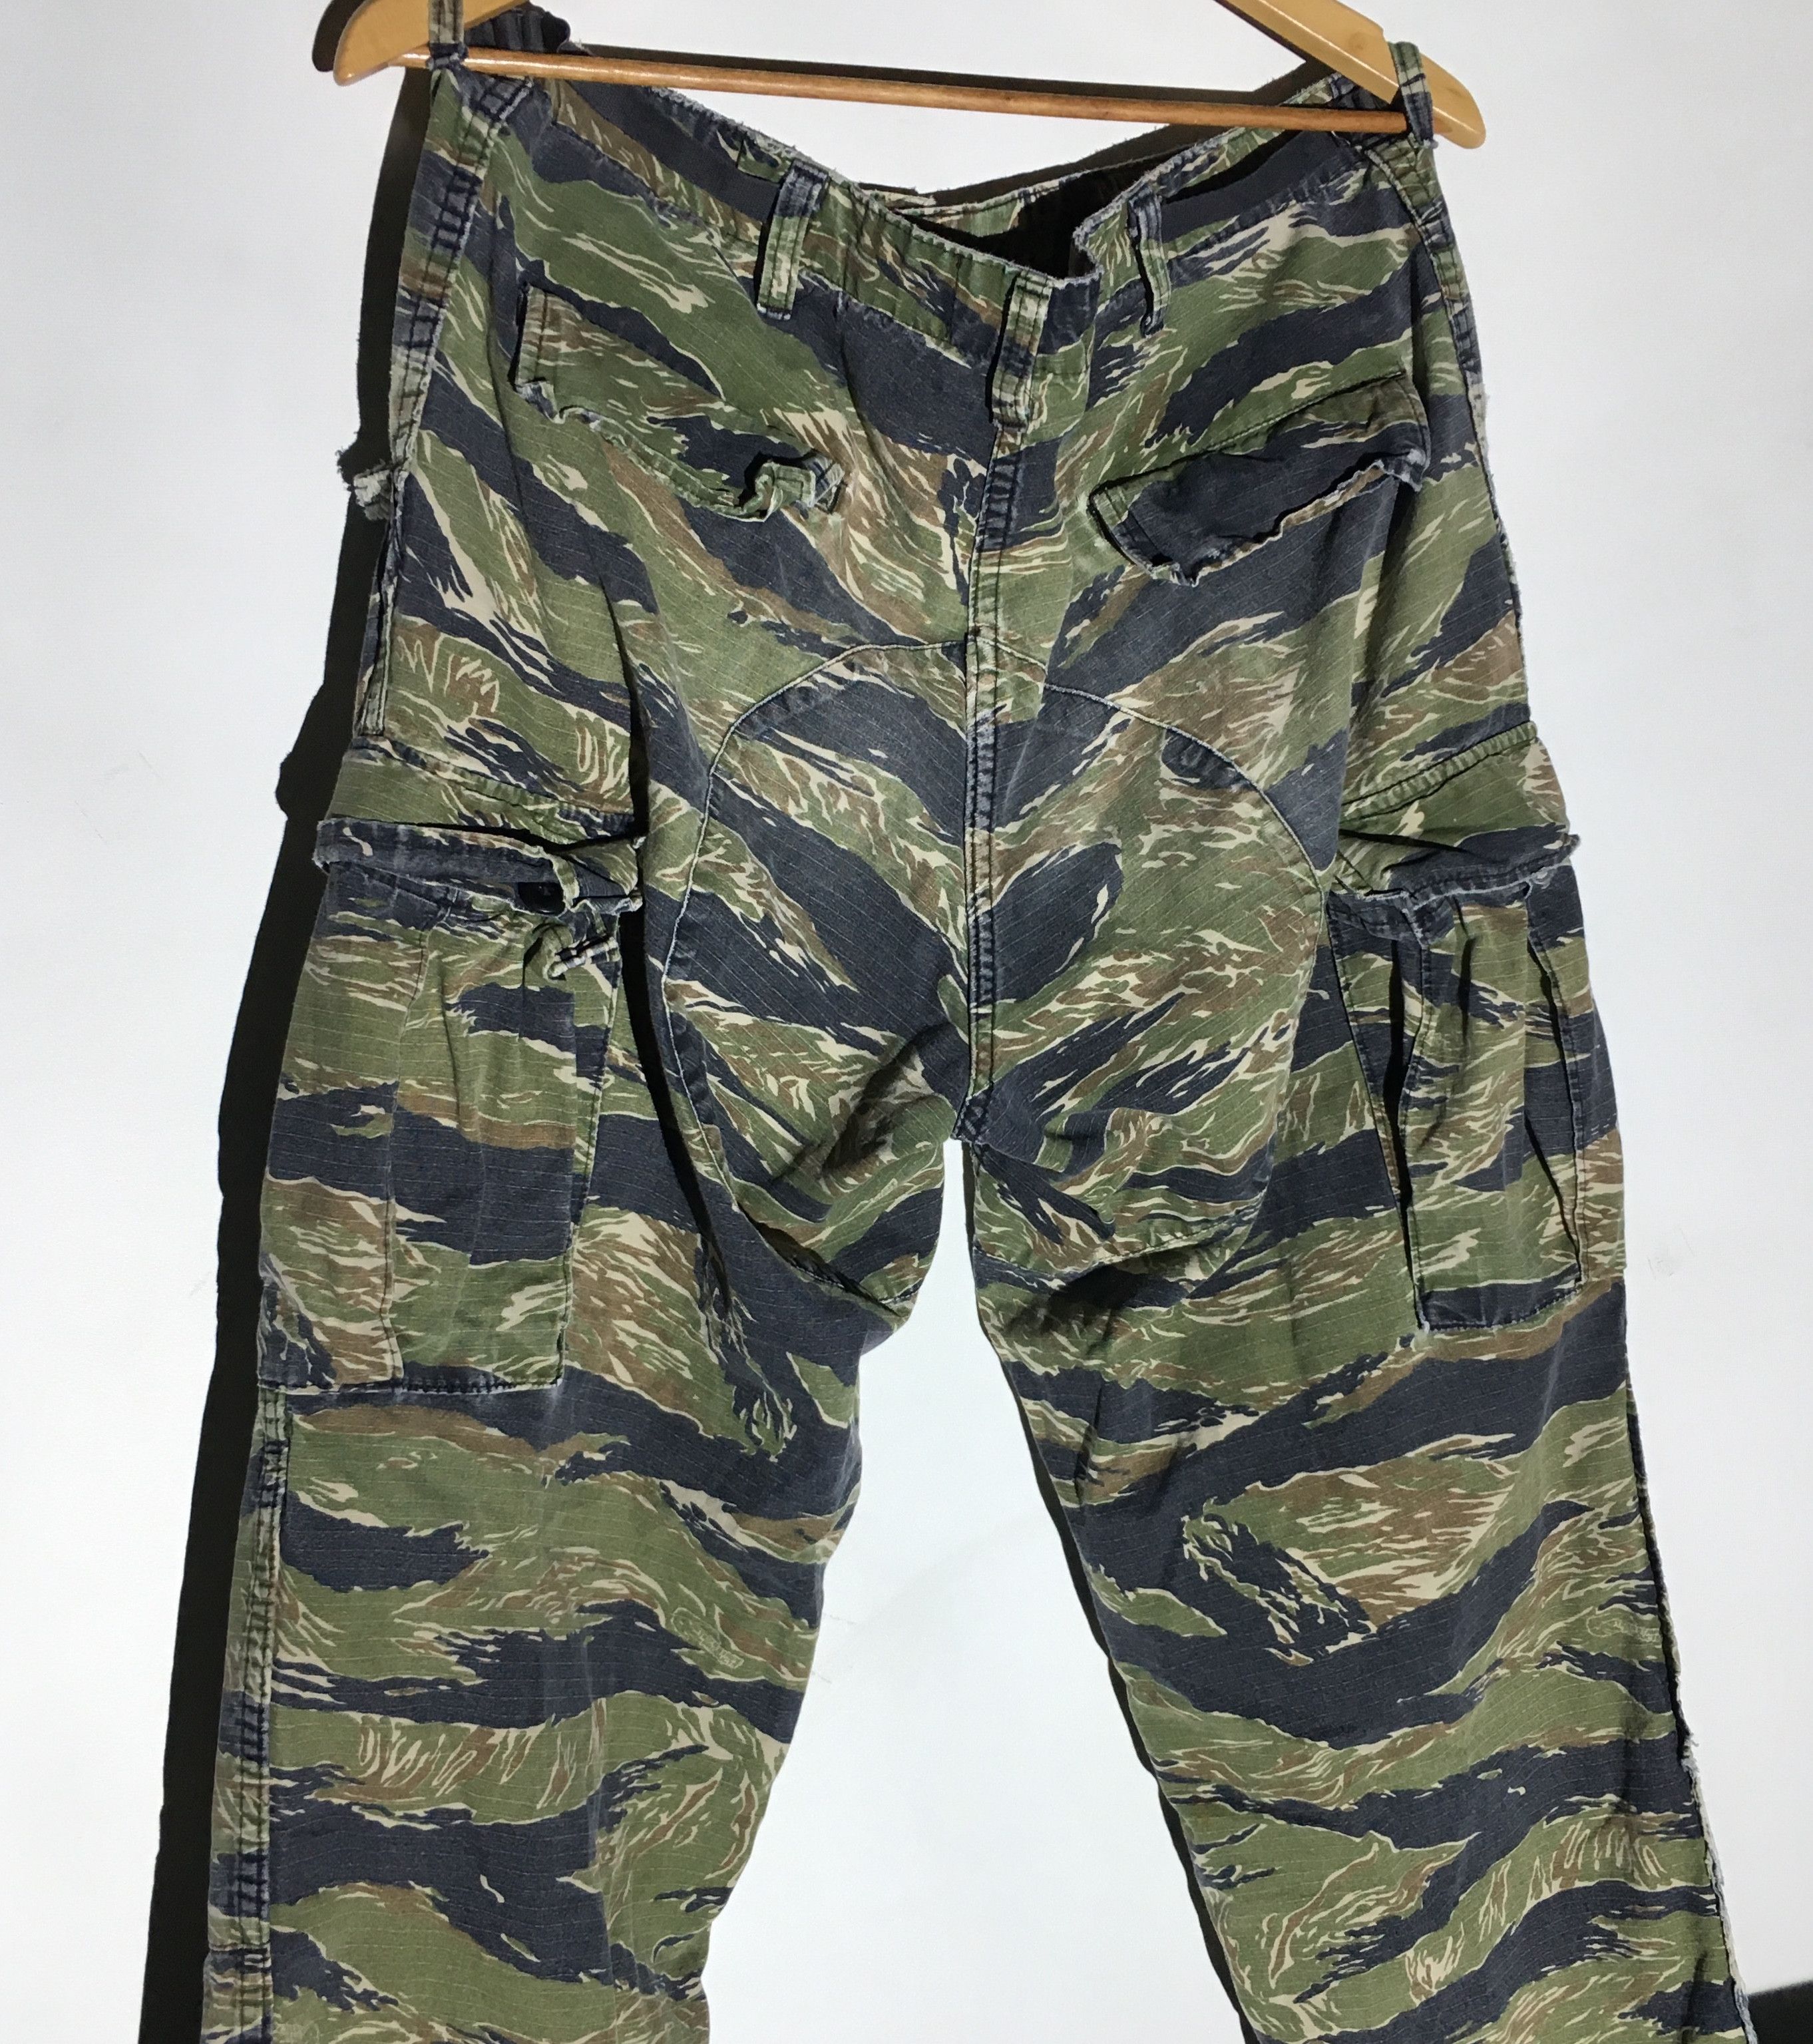 Vintage Vintage Military Issued Tiger Stripe Camo Cargo Pants Size US 32 / EU 48 - 2 Preview